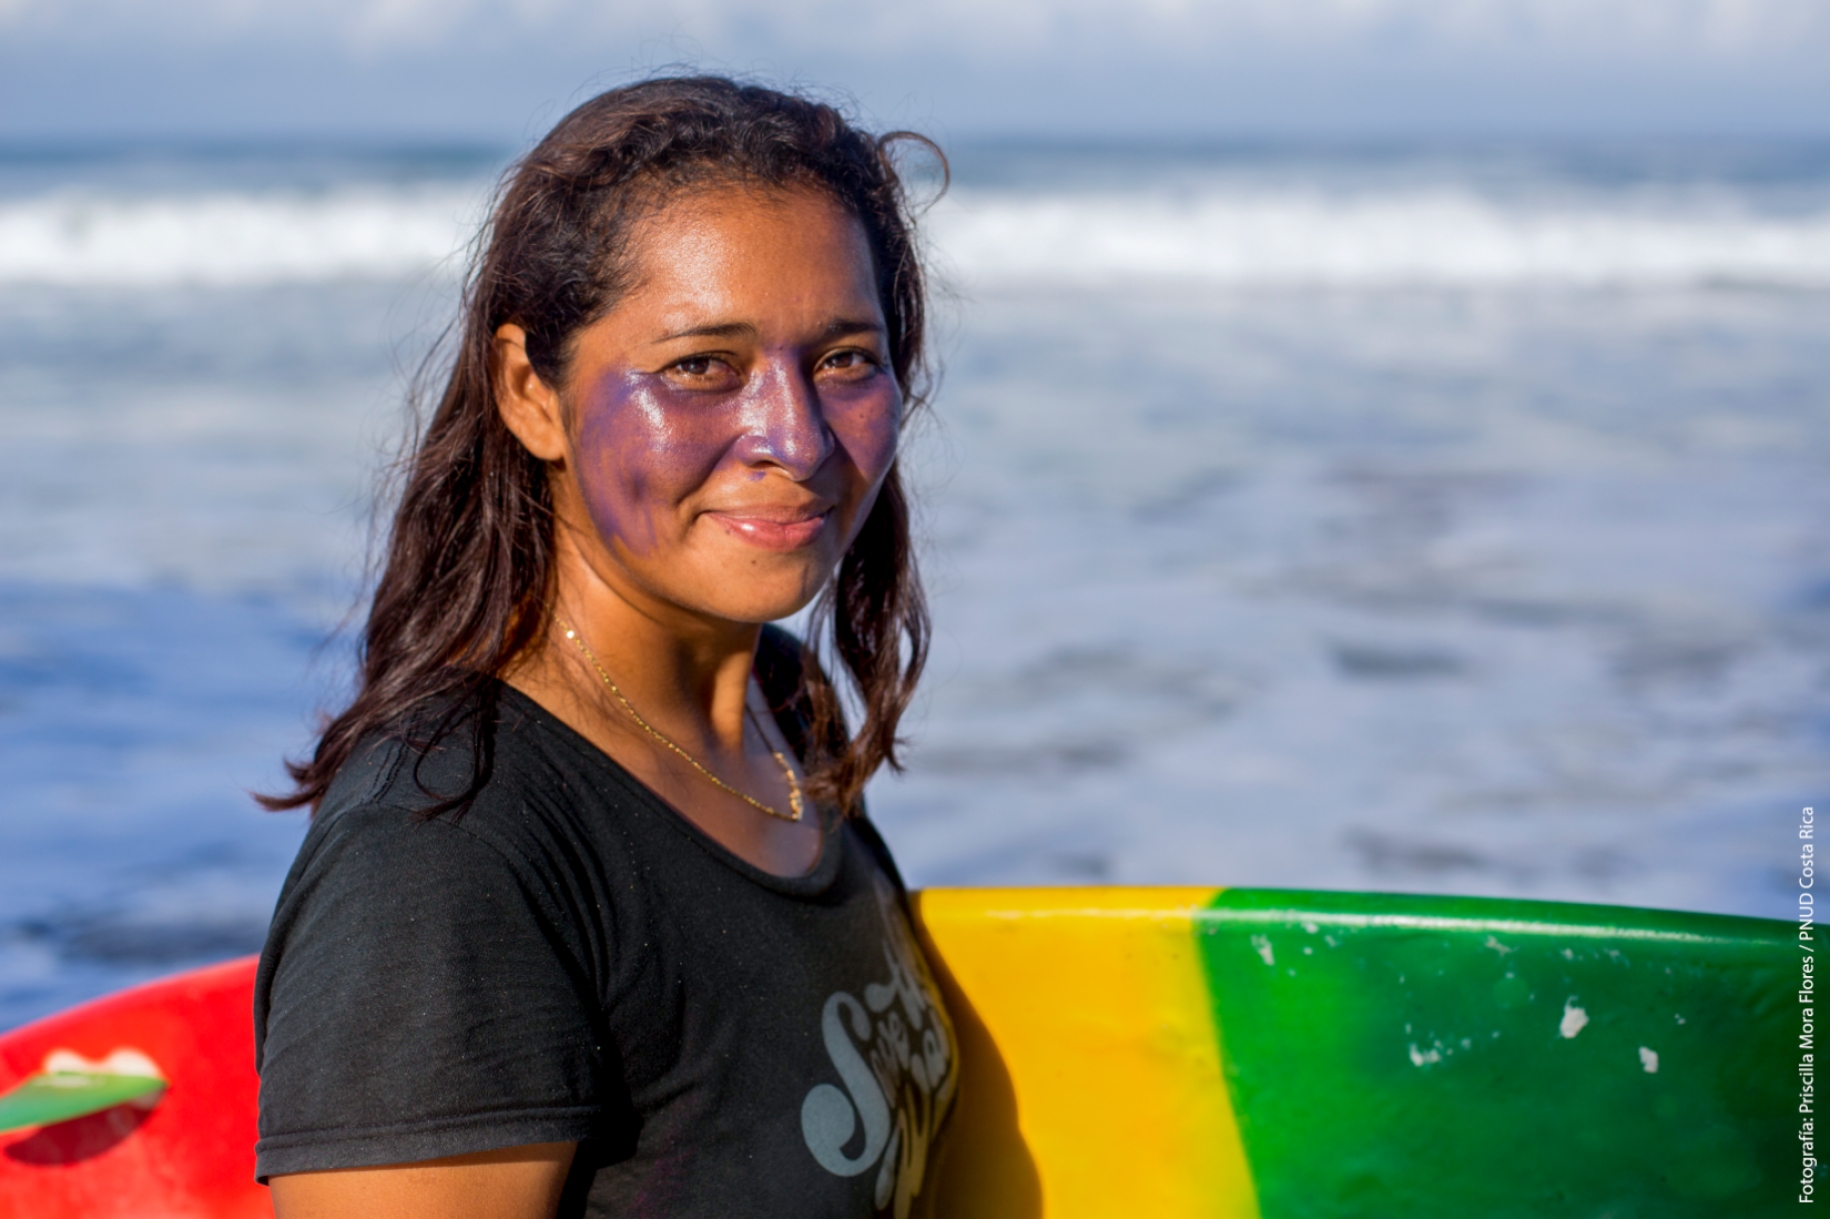 A female surfer smiles as she holds her surfboard by the shore of a beach.